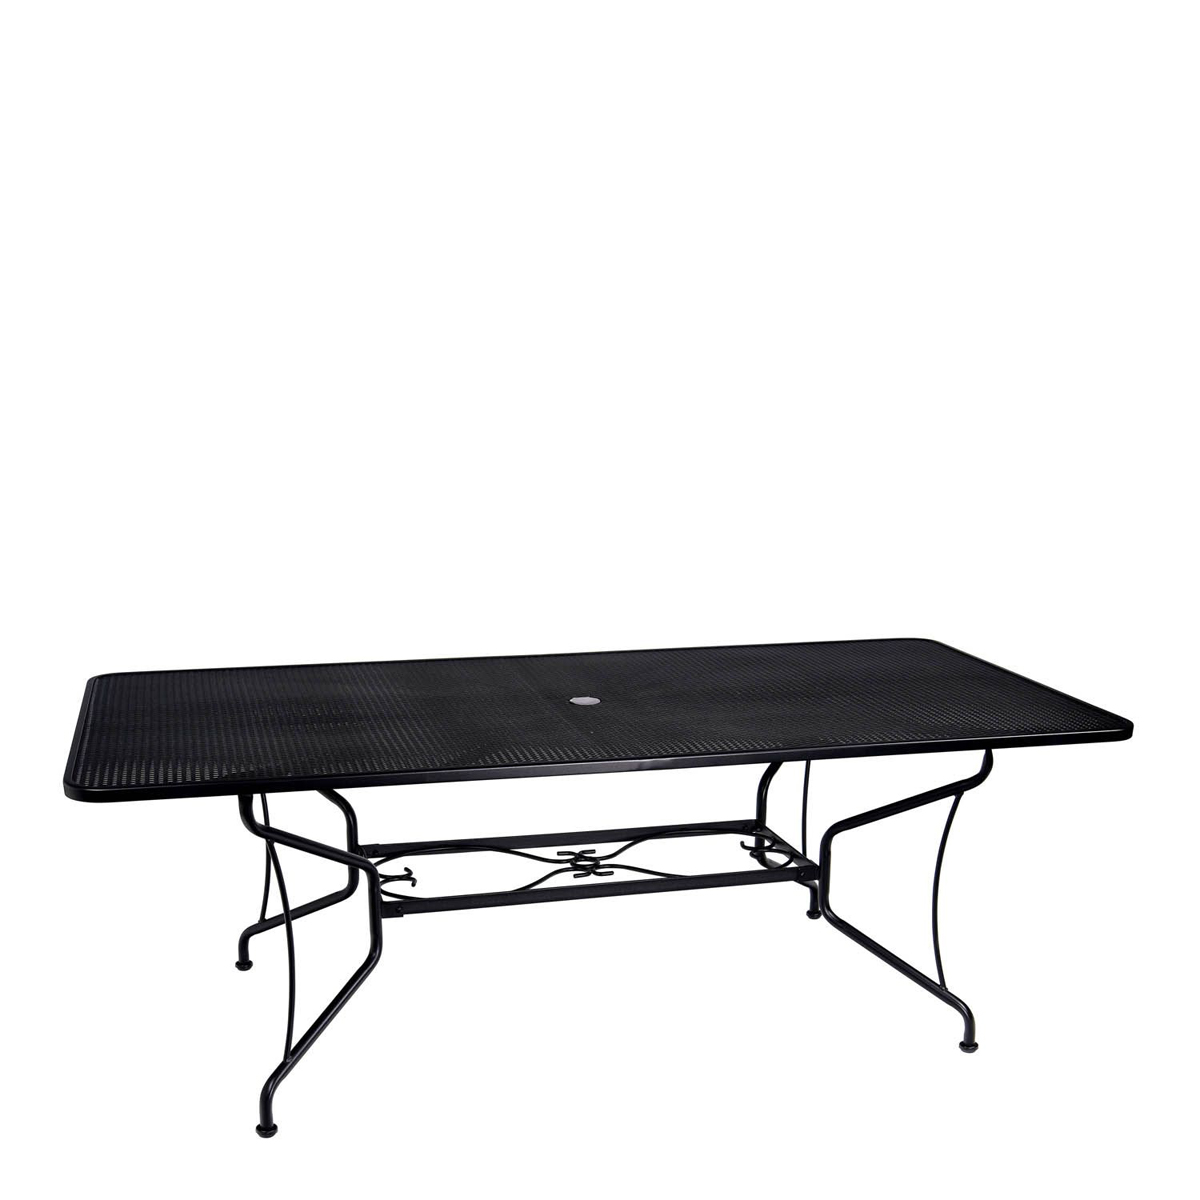 42 inch x 84 inch briarwood rectangular dining table – smooth black product image